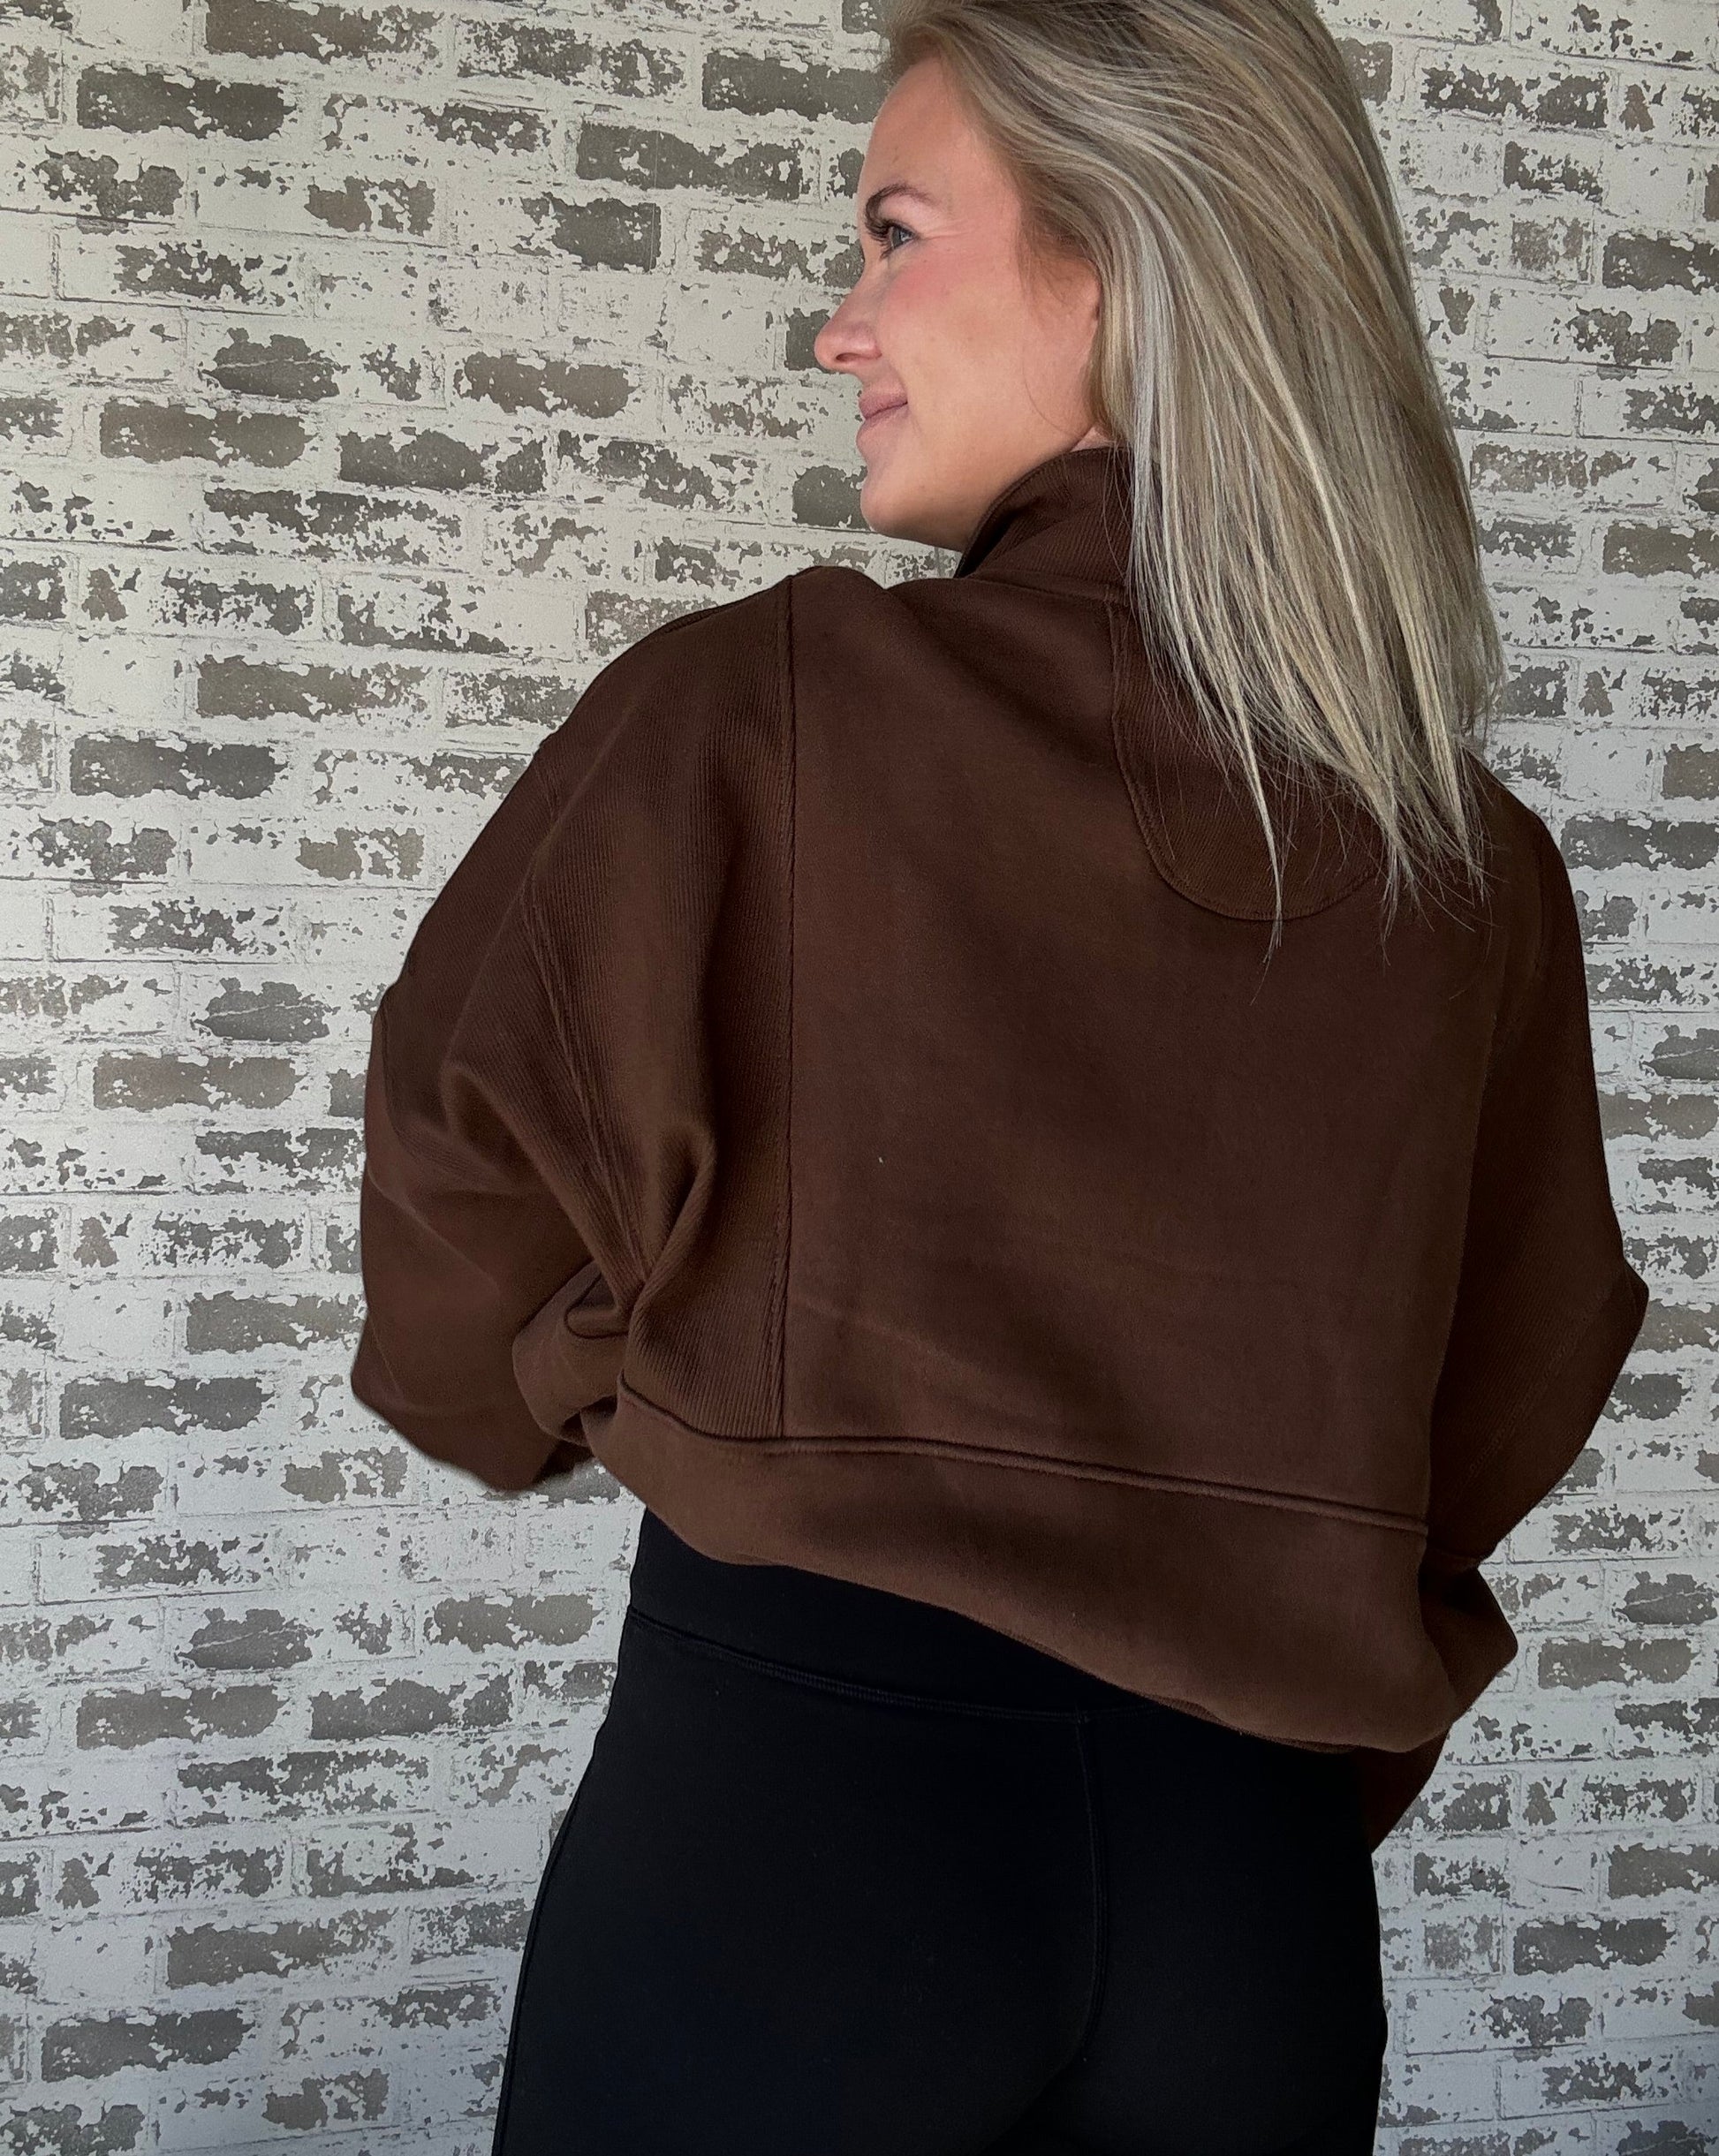 white women wearing an oversized cropped pull over that is a half zip sweater.  She is standing in front of a brick wall with her hands in her pockets of the sweater.